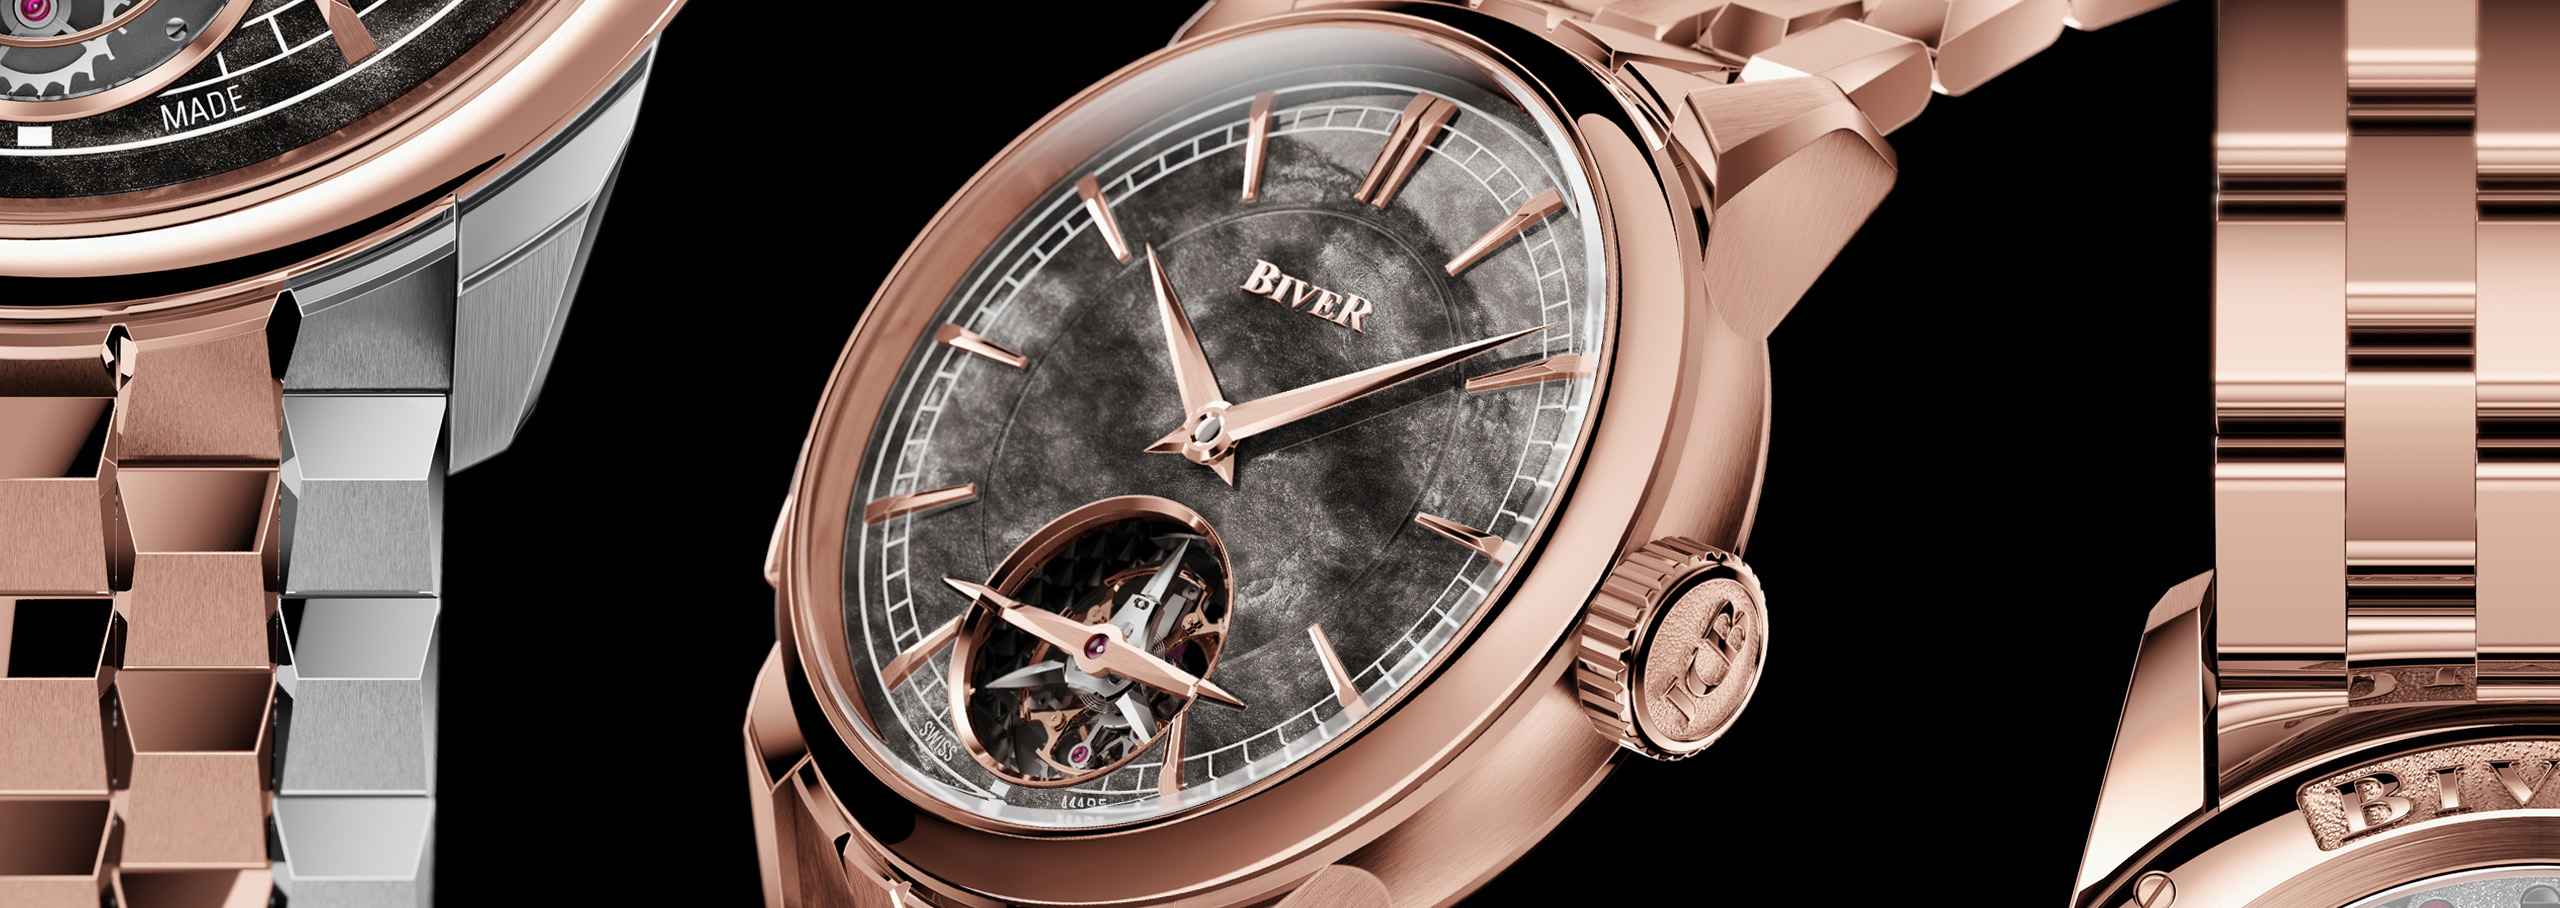 Introducing The Carillon Tourbillon Biver, The First Watch of JCBiver and  His Son